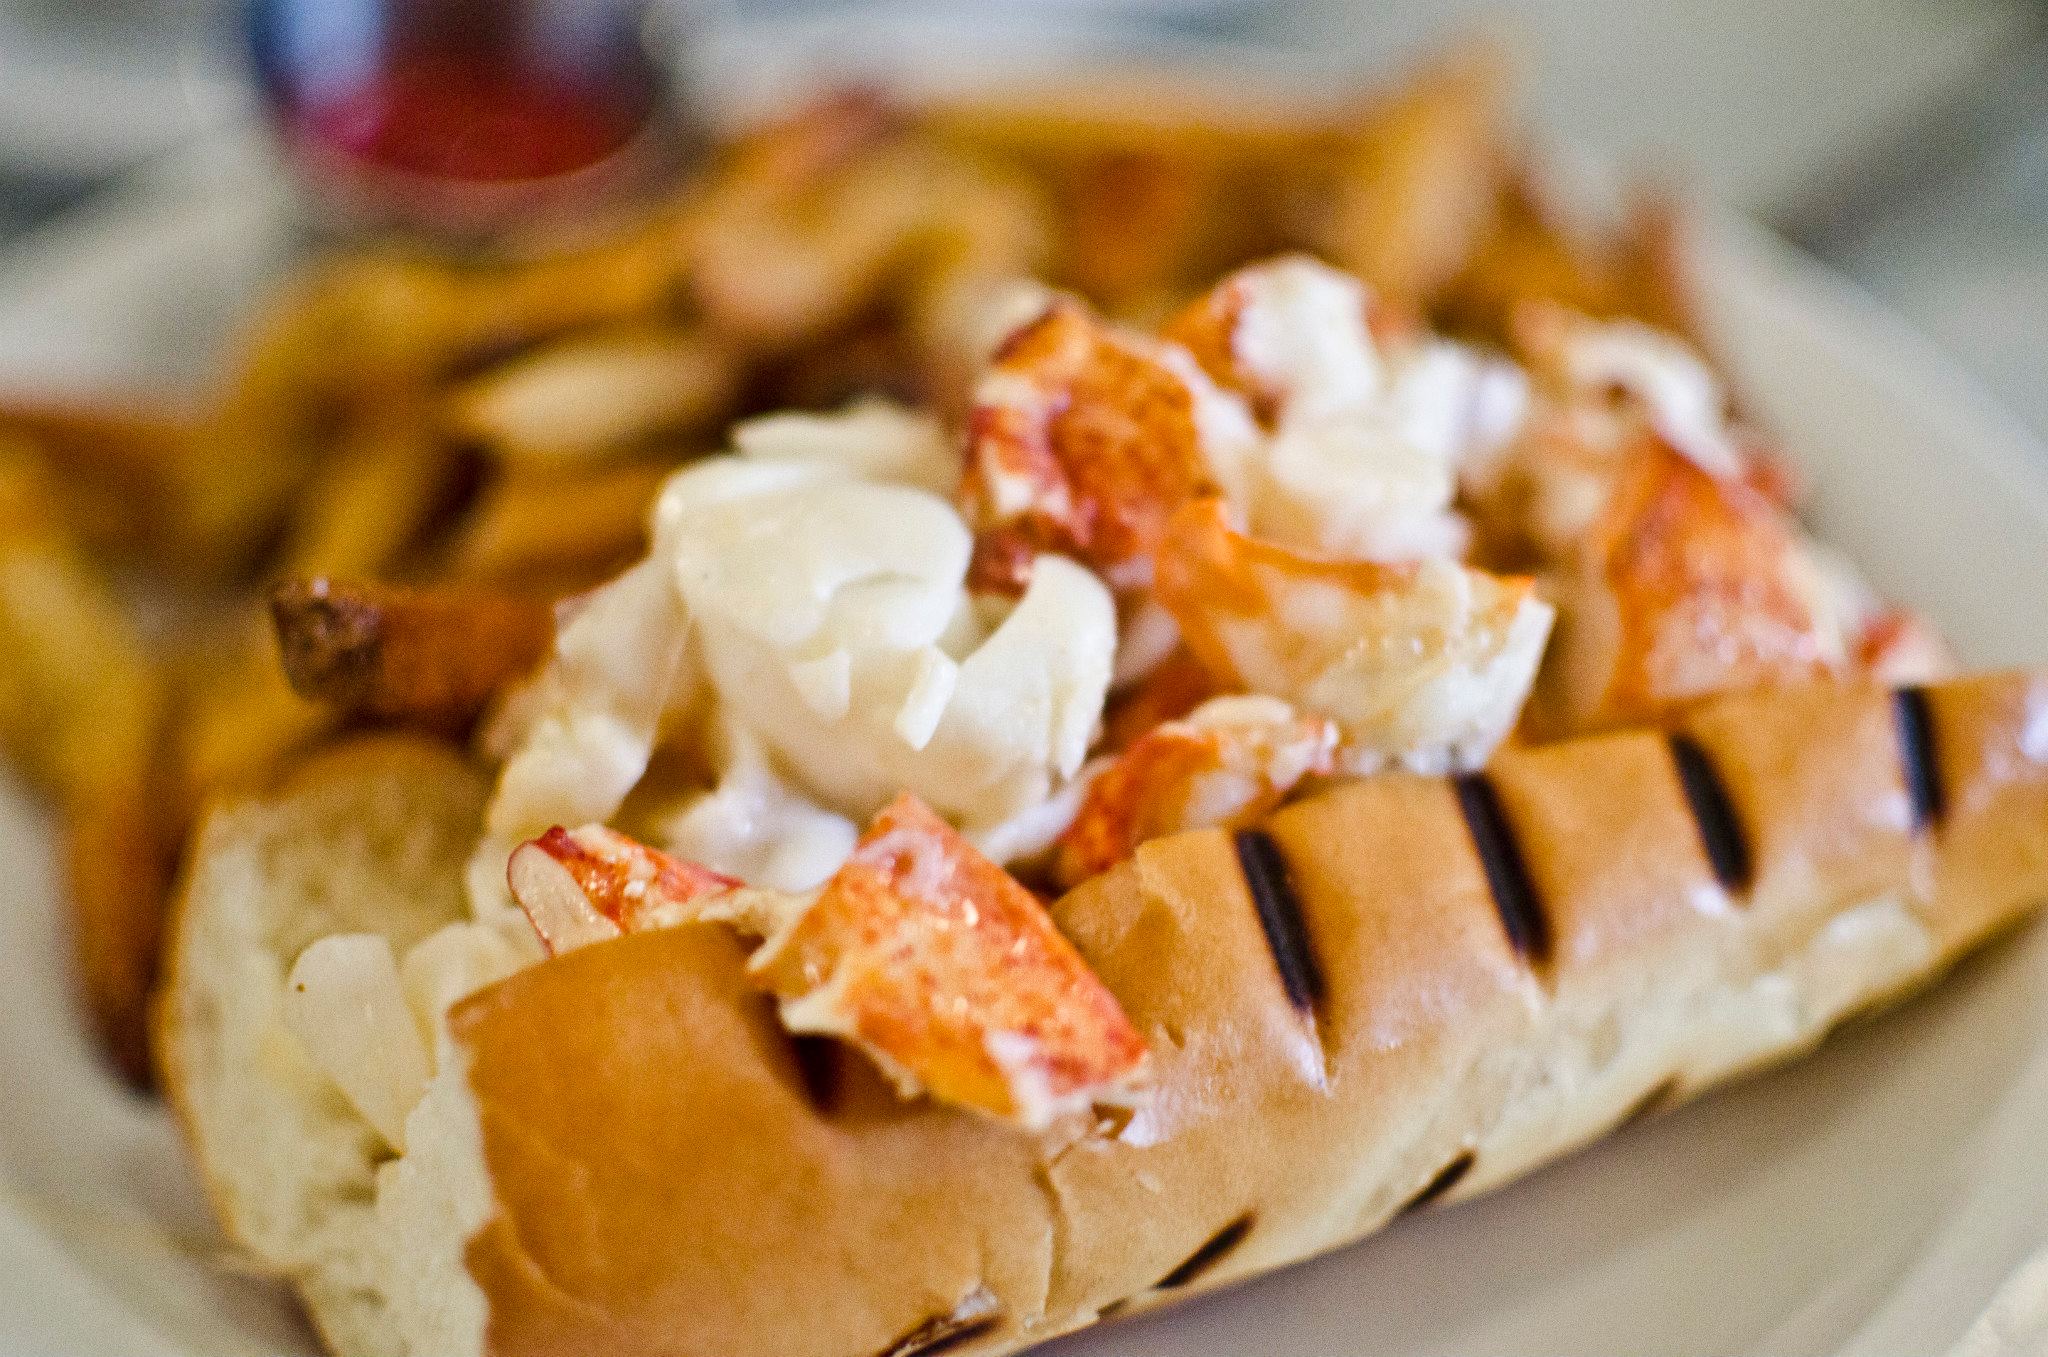 The Maine lobster roll at Neptune Oyster is served on a grilled hot dog bun atop a white plate, and is accompanied by French fries and a ramekin of ketchup. 